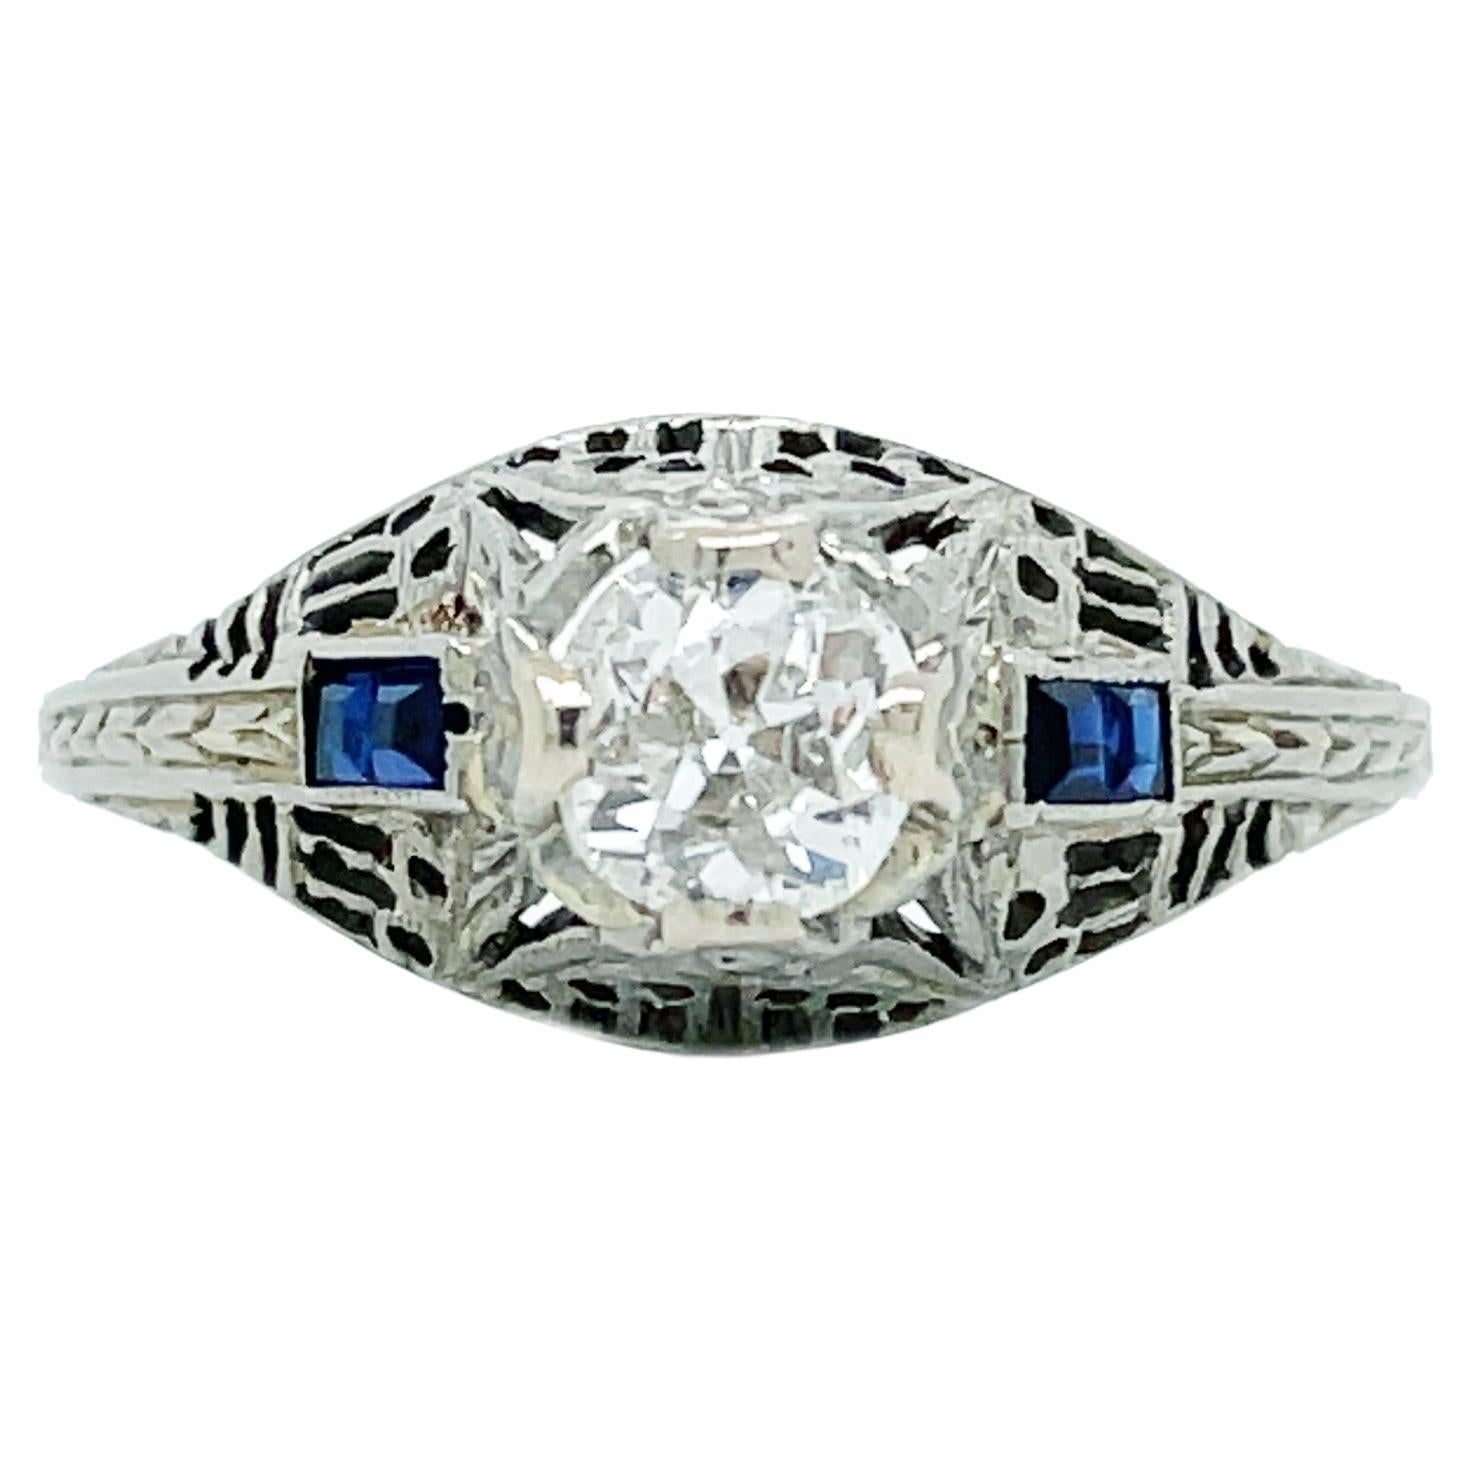 1915 Art Deco Diamond and Sapphire White Gold Filigree Ring with GIA Cert.